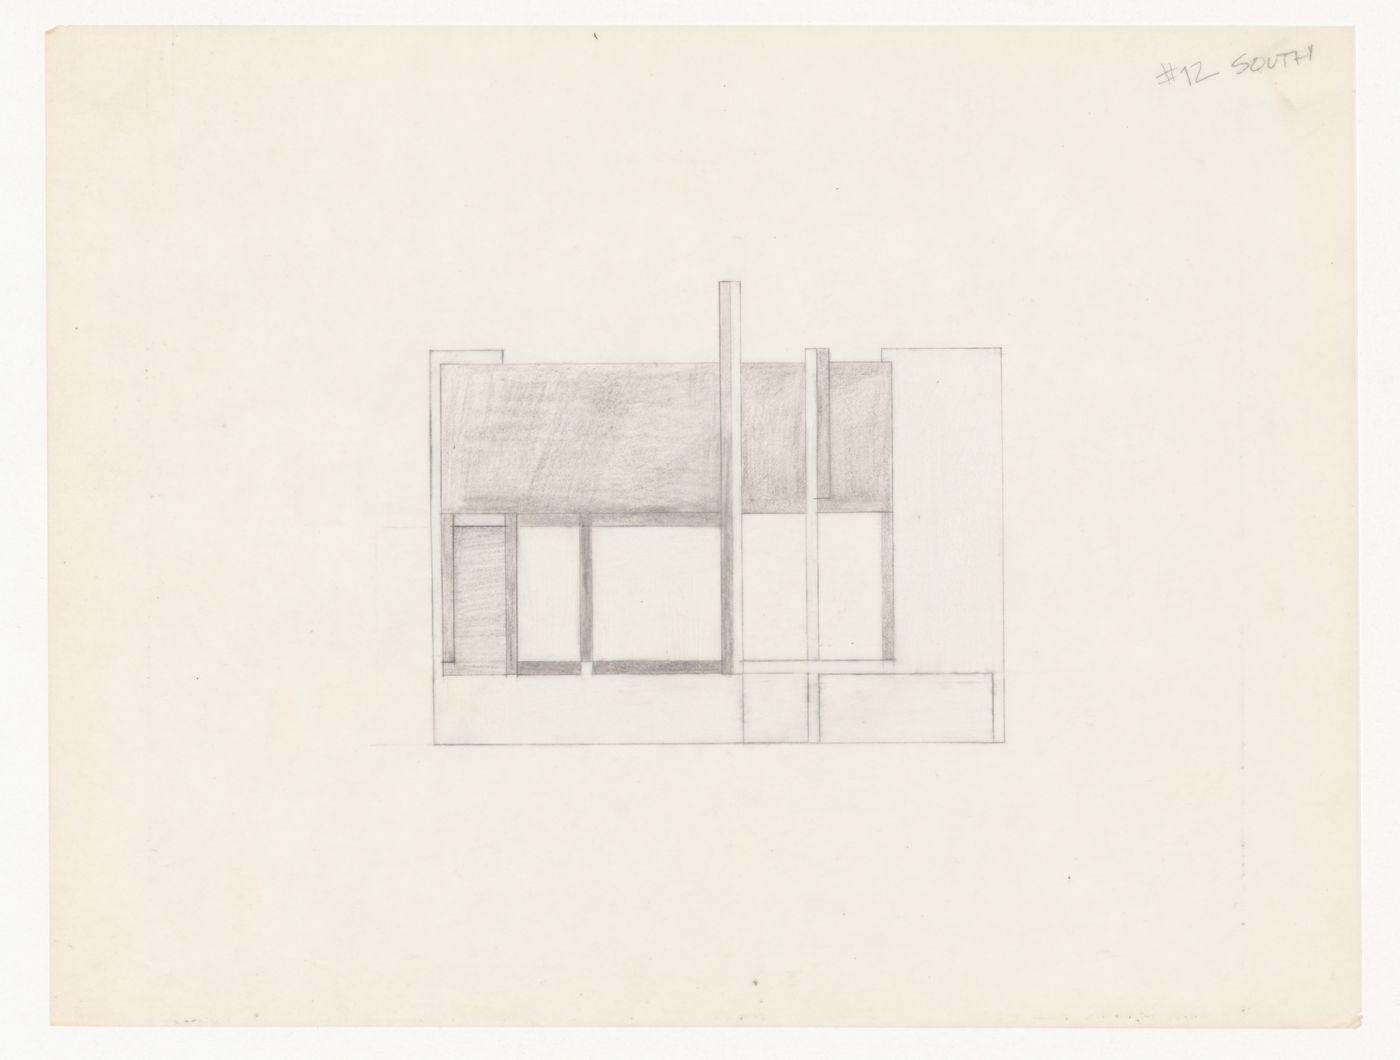 Sketch elevation for House VI, Cornwall, Connecticut